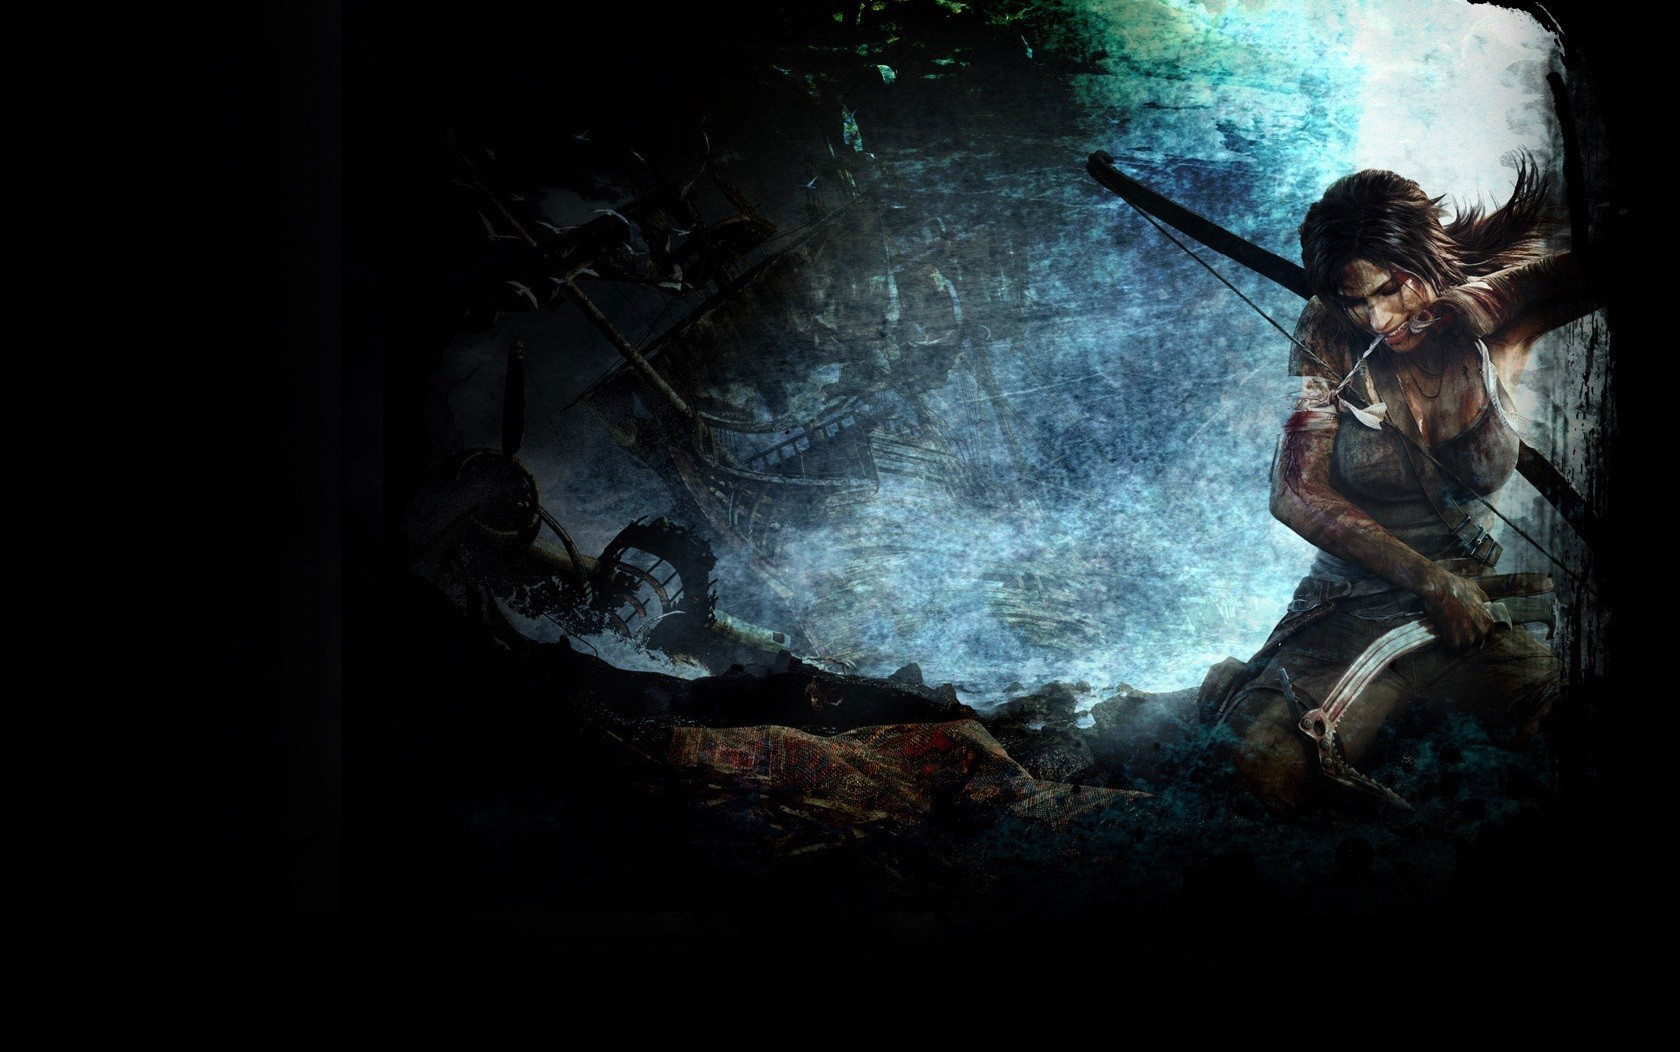 General 1680x1052 Tomb Raider pickaxes bow and arrow shipwreck video games brunette tank top video game art video game girls wounds blood bow PC gaming Lara Croft (Tomb Raider)